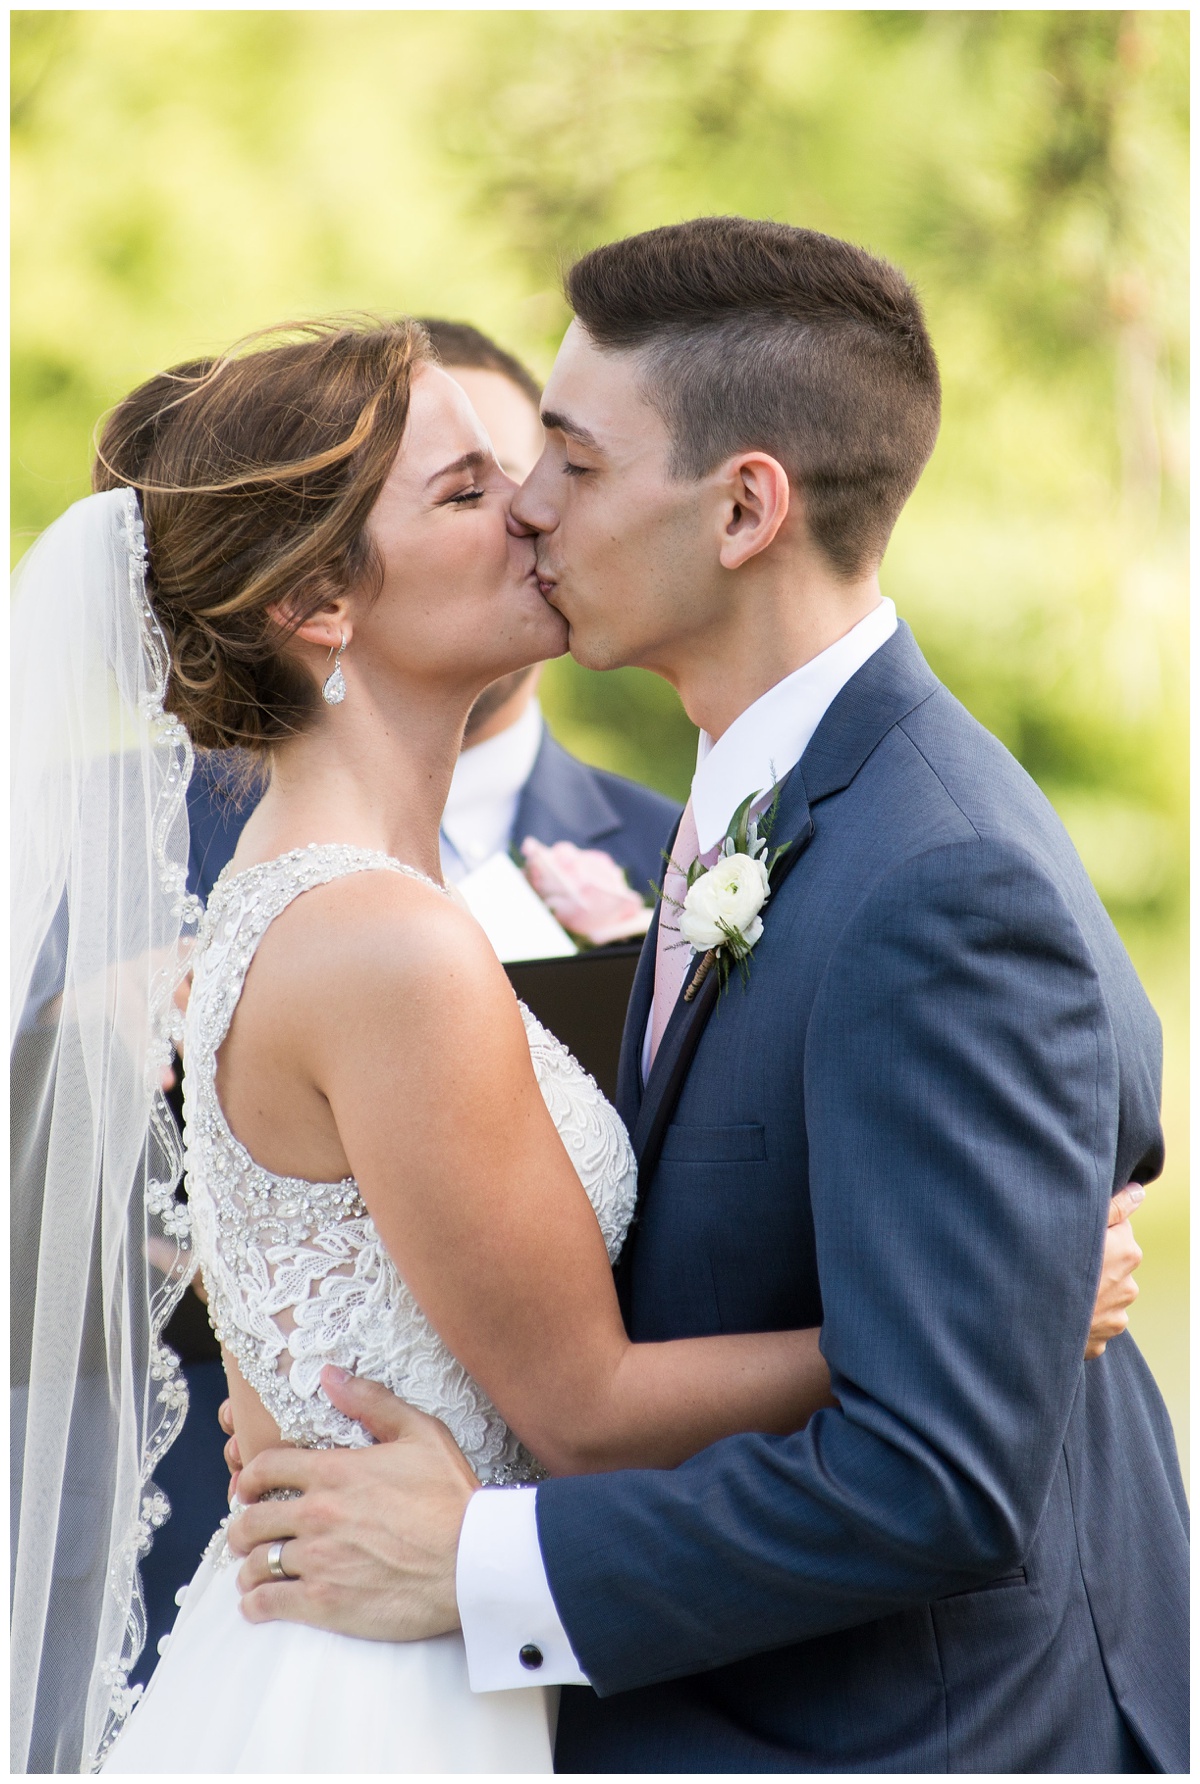 first kiss - just married photo - outdoors at chesapeake bay wedding on maryland eastern shore in the summer in june at the oaks waterfront inn - perfectly charming wedding inspiration | My Eastern Shore Wedding